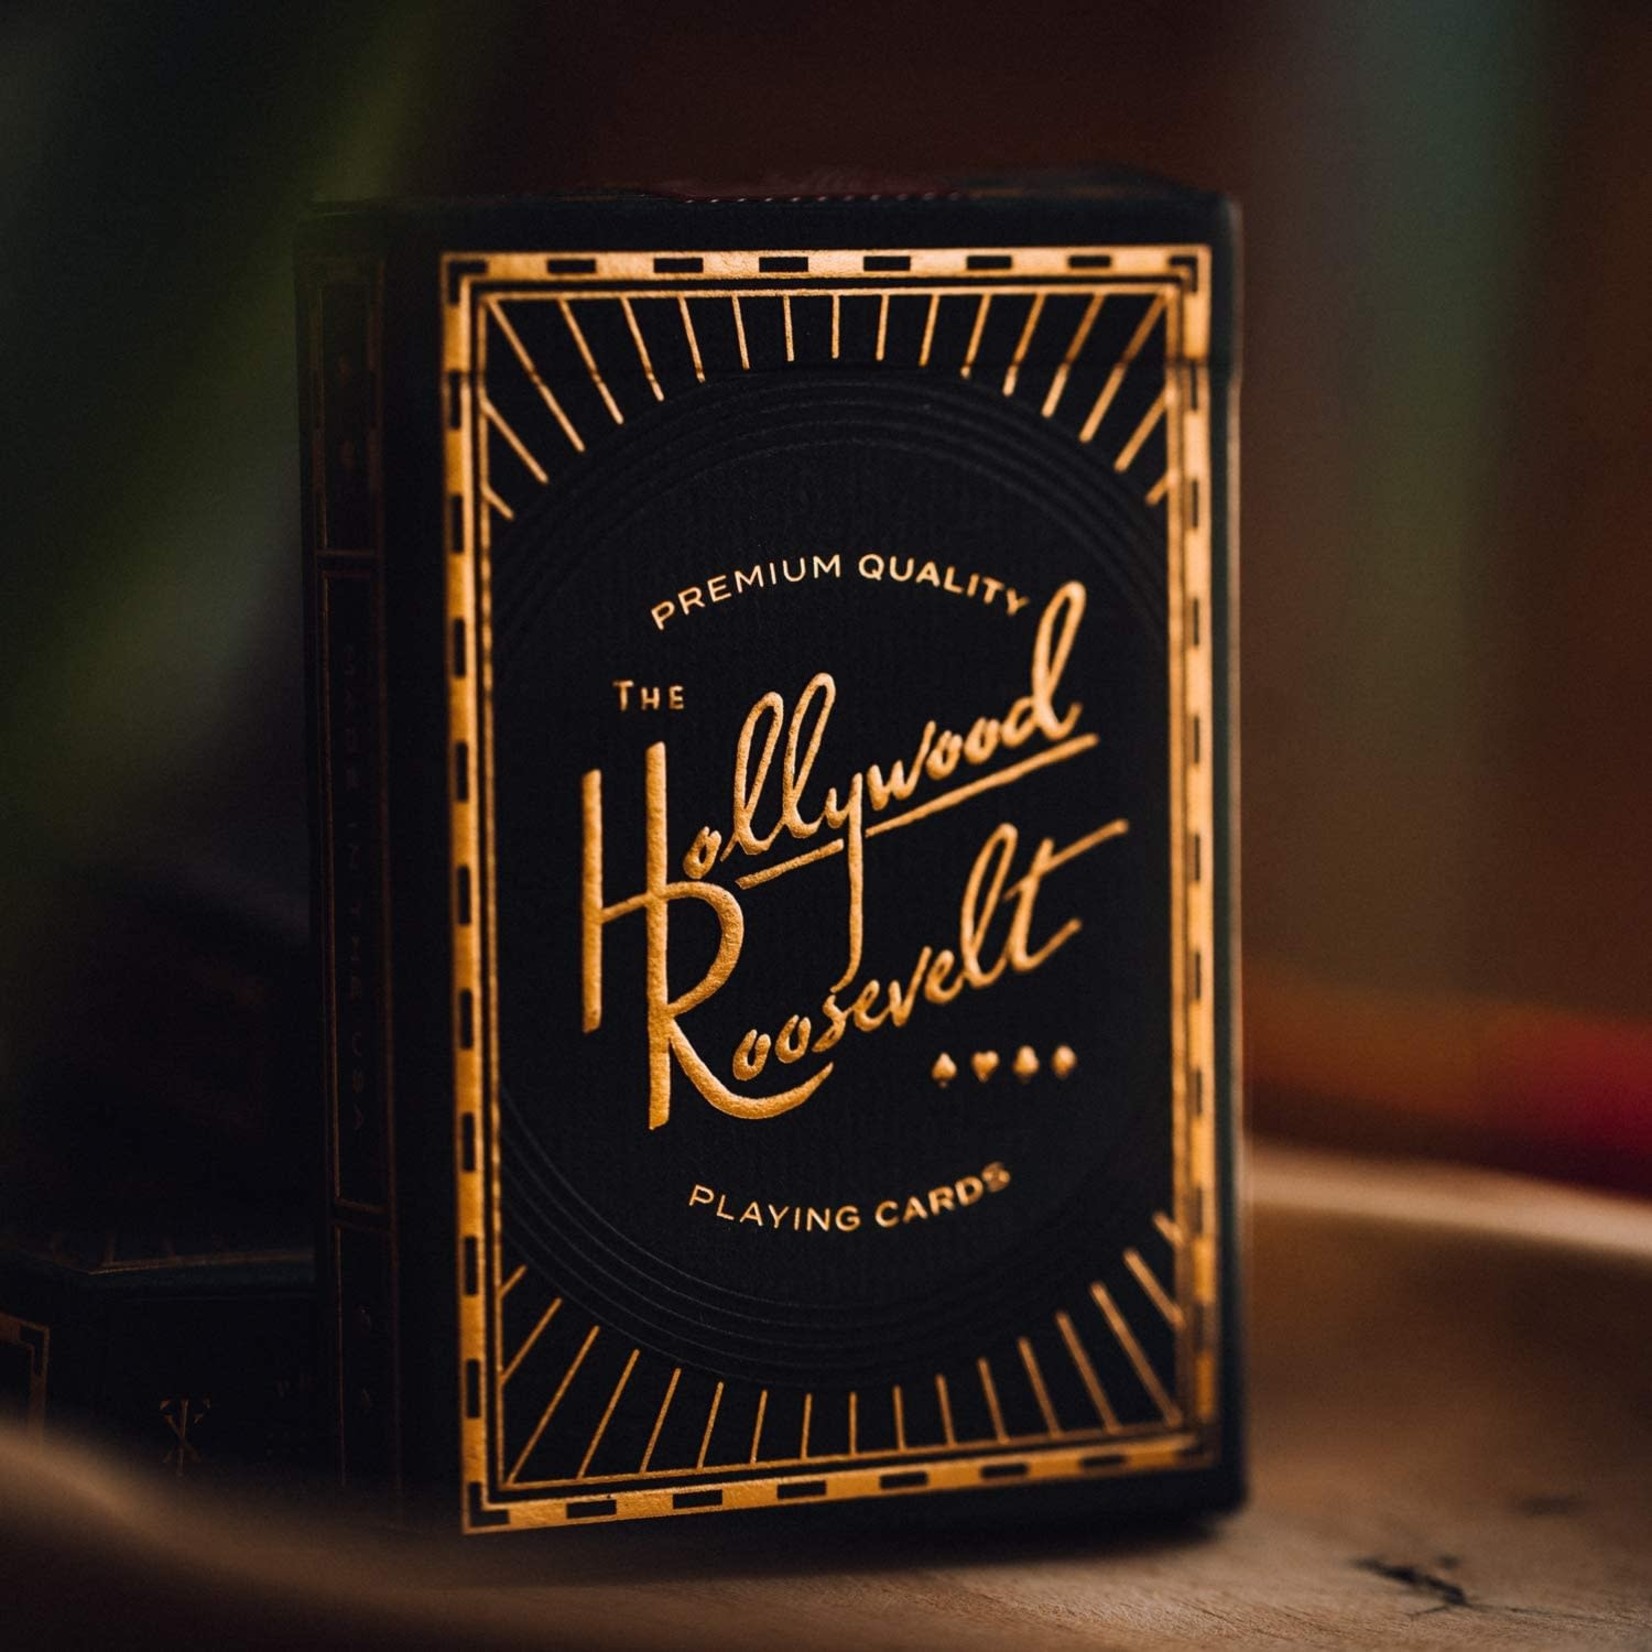 theory11 Premium Playing Cards: Hollywood Roosevelt